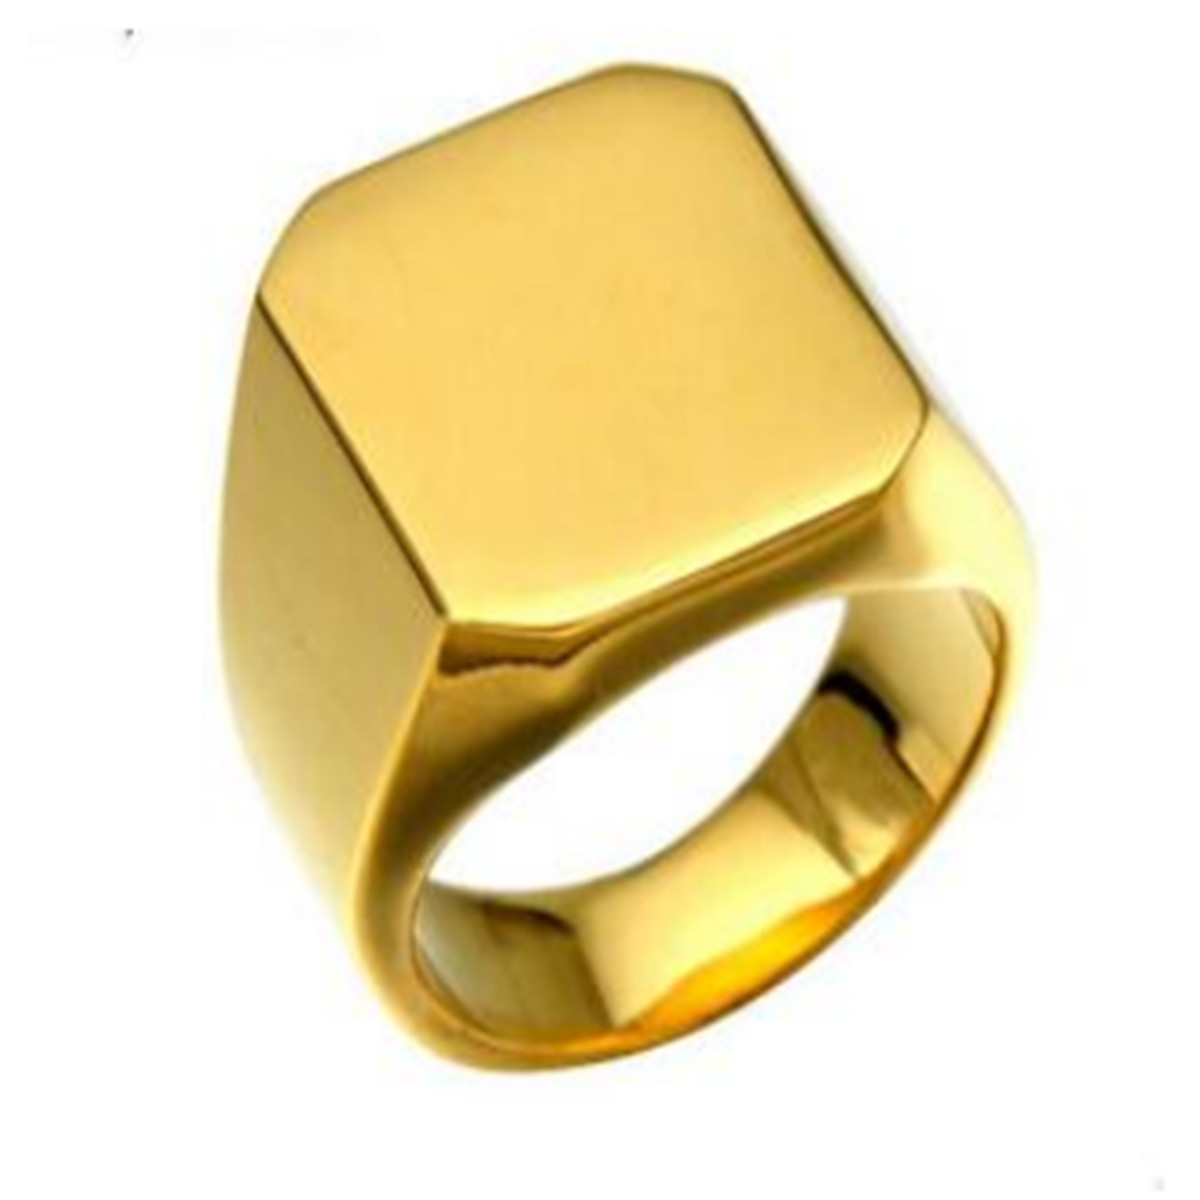 Fashion Mens Gold Stainless Steel Ring Tone High Polished Signet Solid Gold Stainless Steel Signet Ring